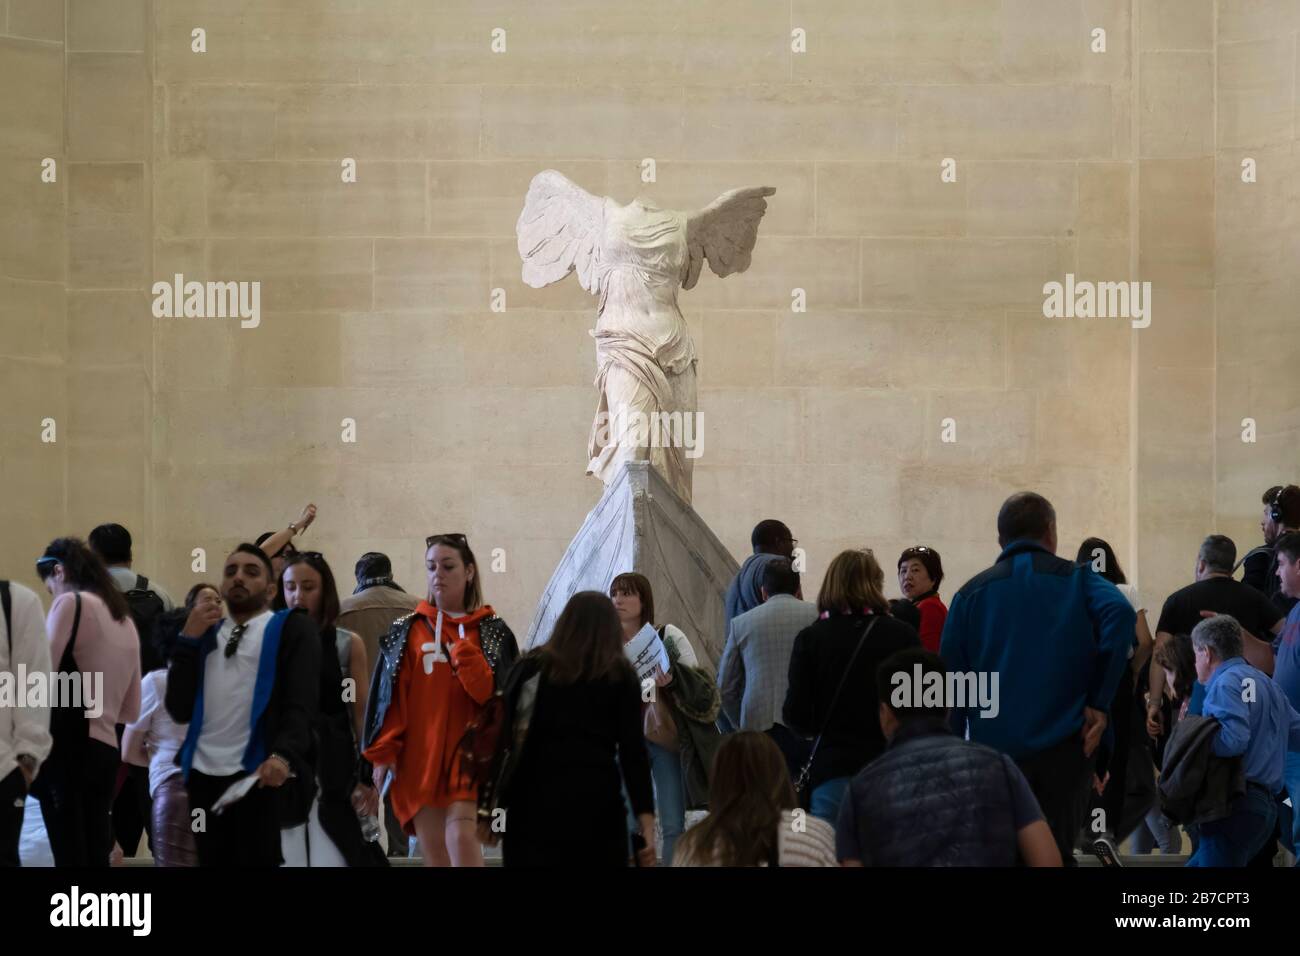 Der Winged Victory of Samothrace Ancient Greece Sculpture im Louvre Museum in Paris, Frankreich, Europa Stockfoto